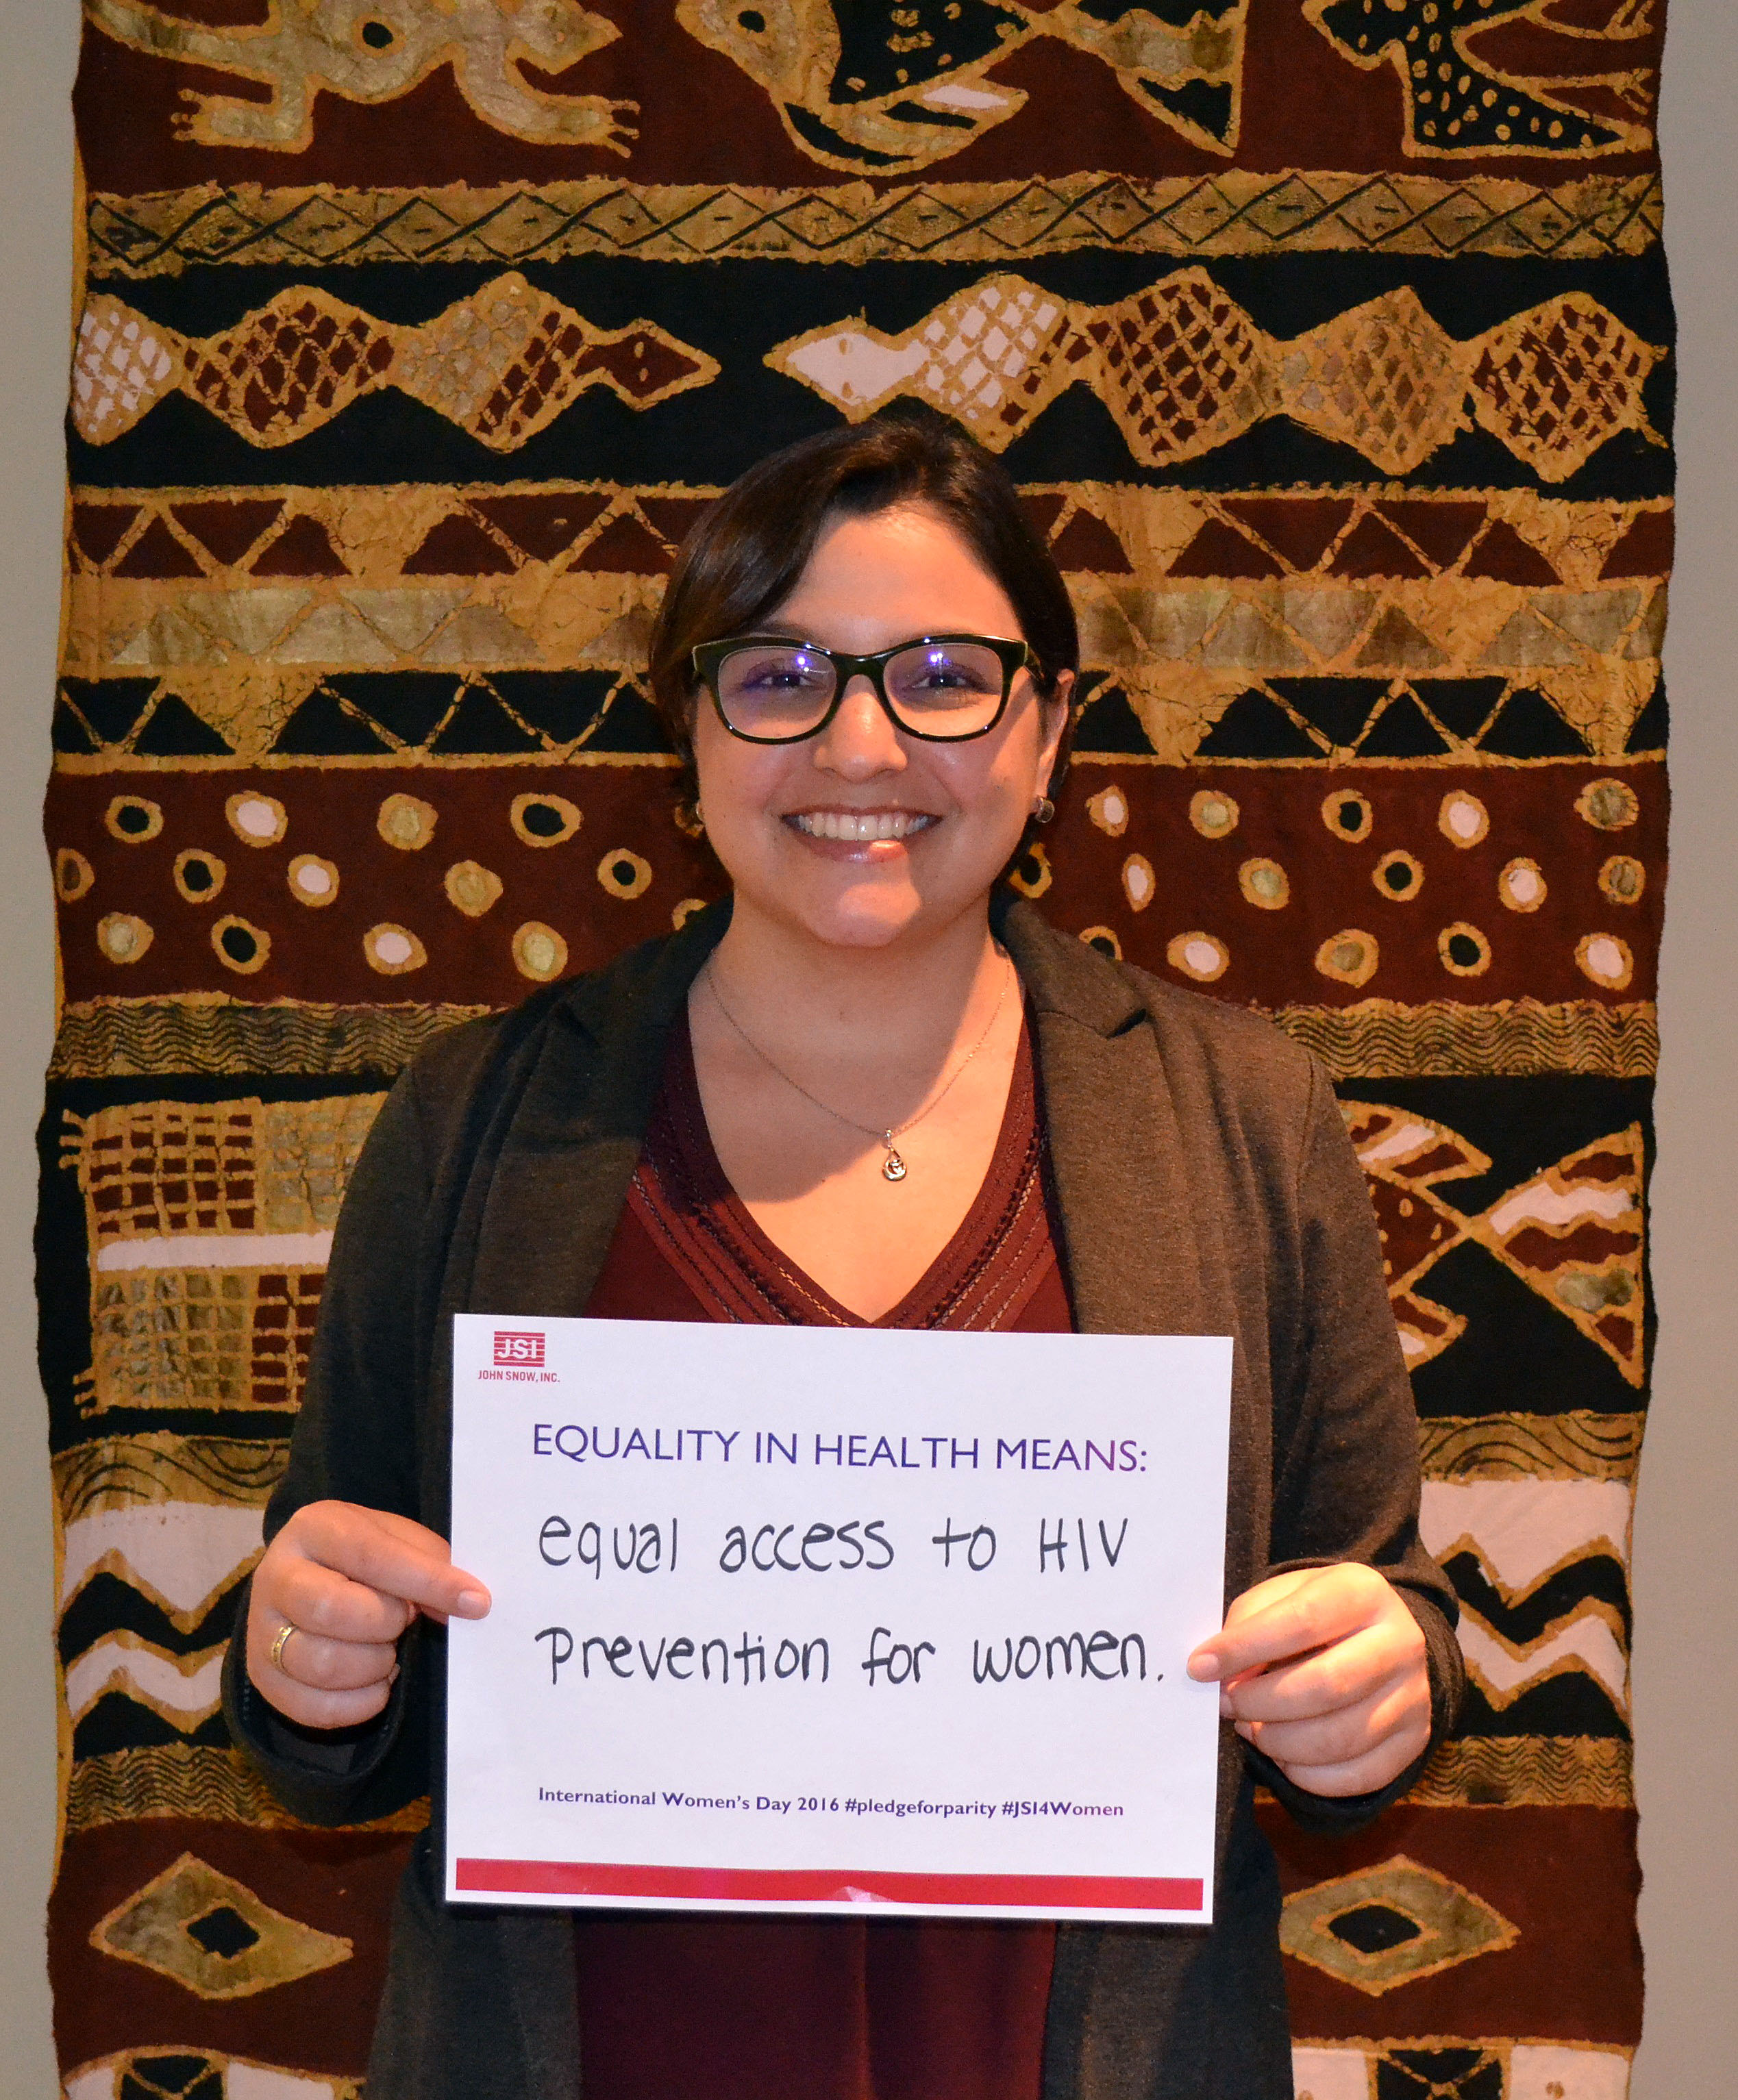 "Equality in health means equal access to HIV prevention for women"